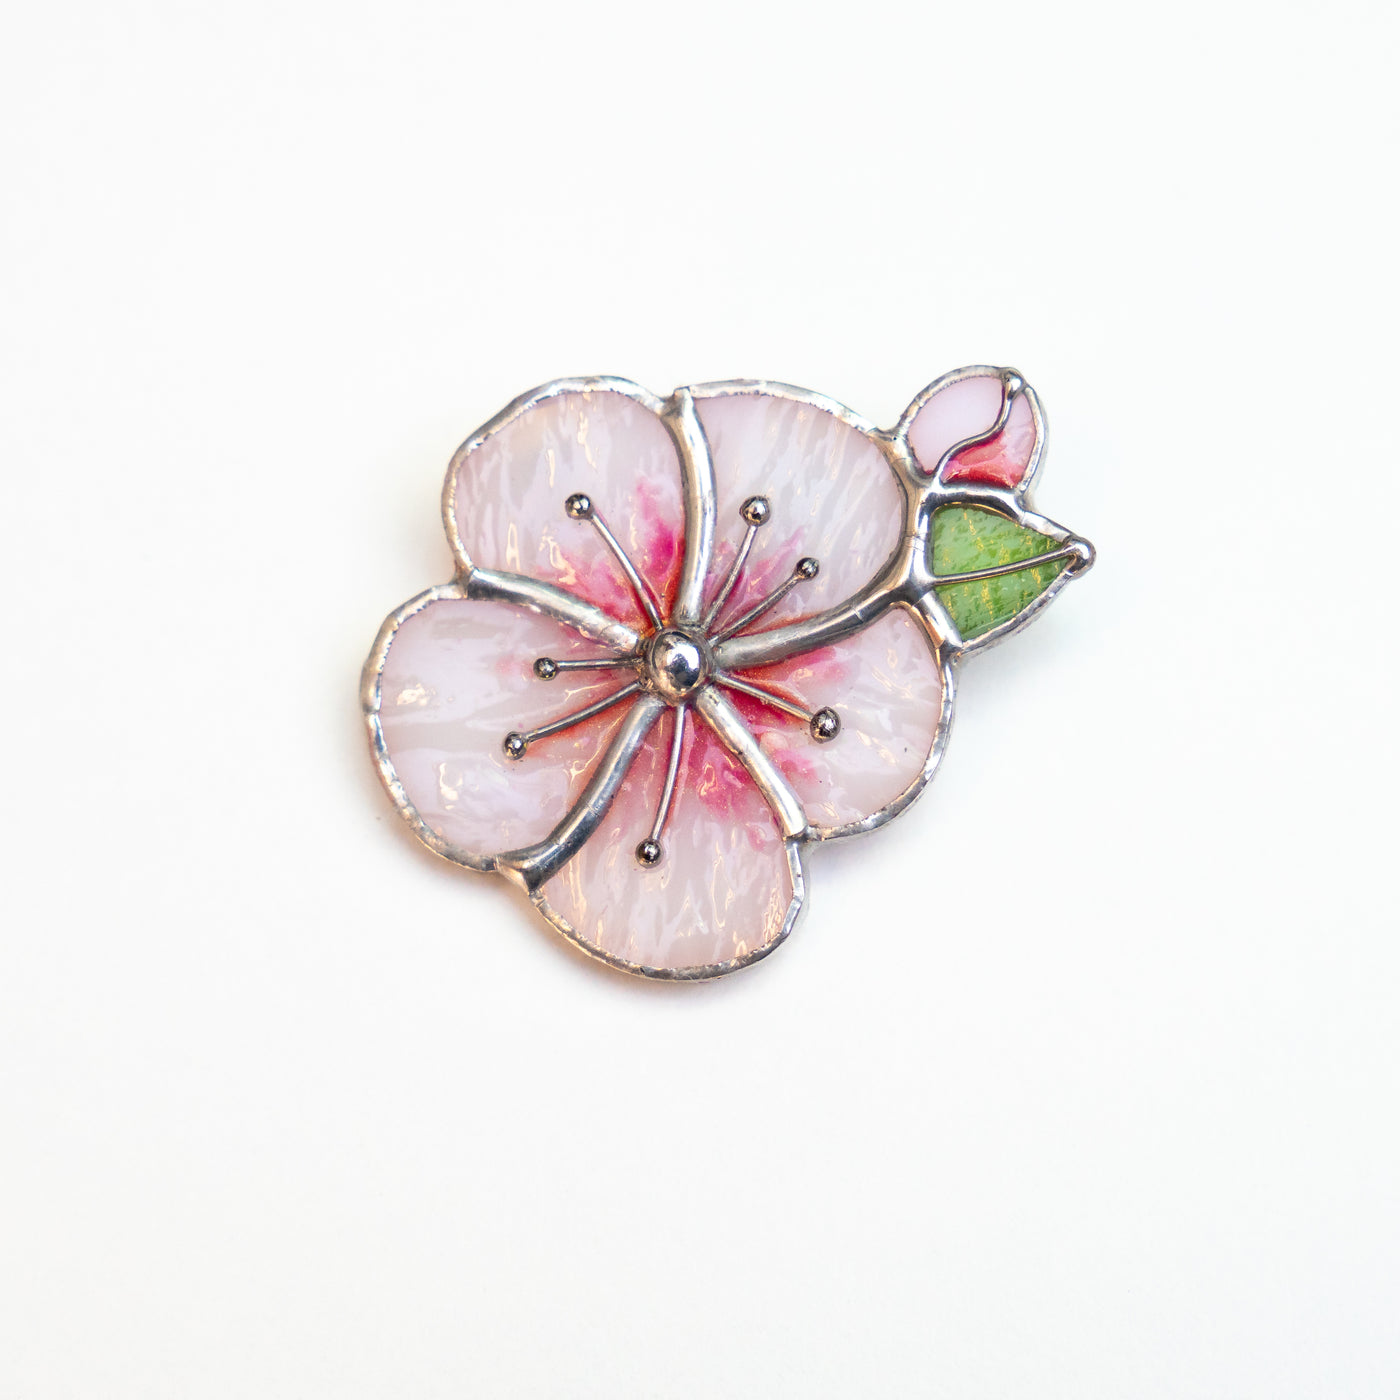 Zoomed stained glass sakura blossom pin